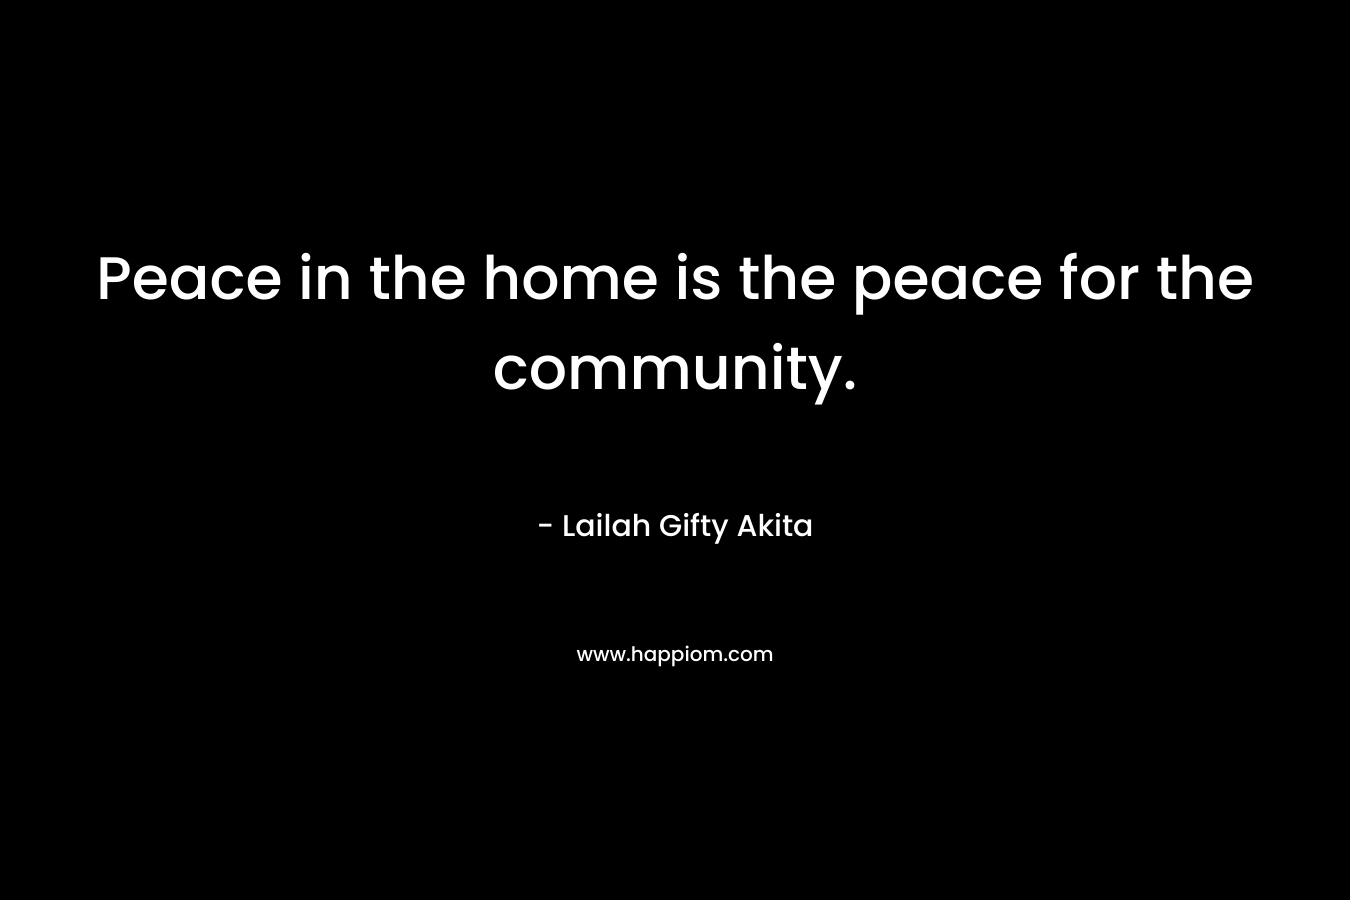 Peace in the home is the peace for the community.